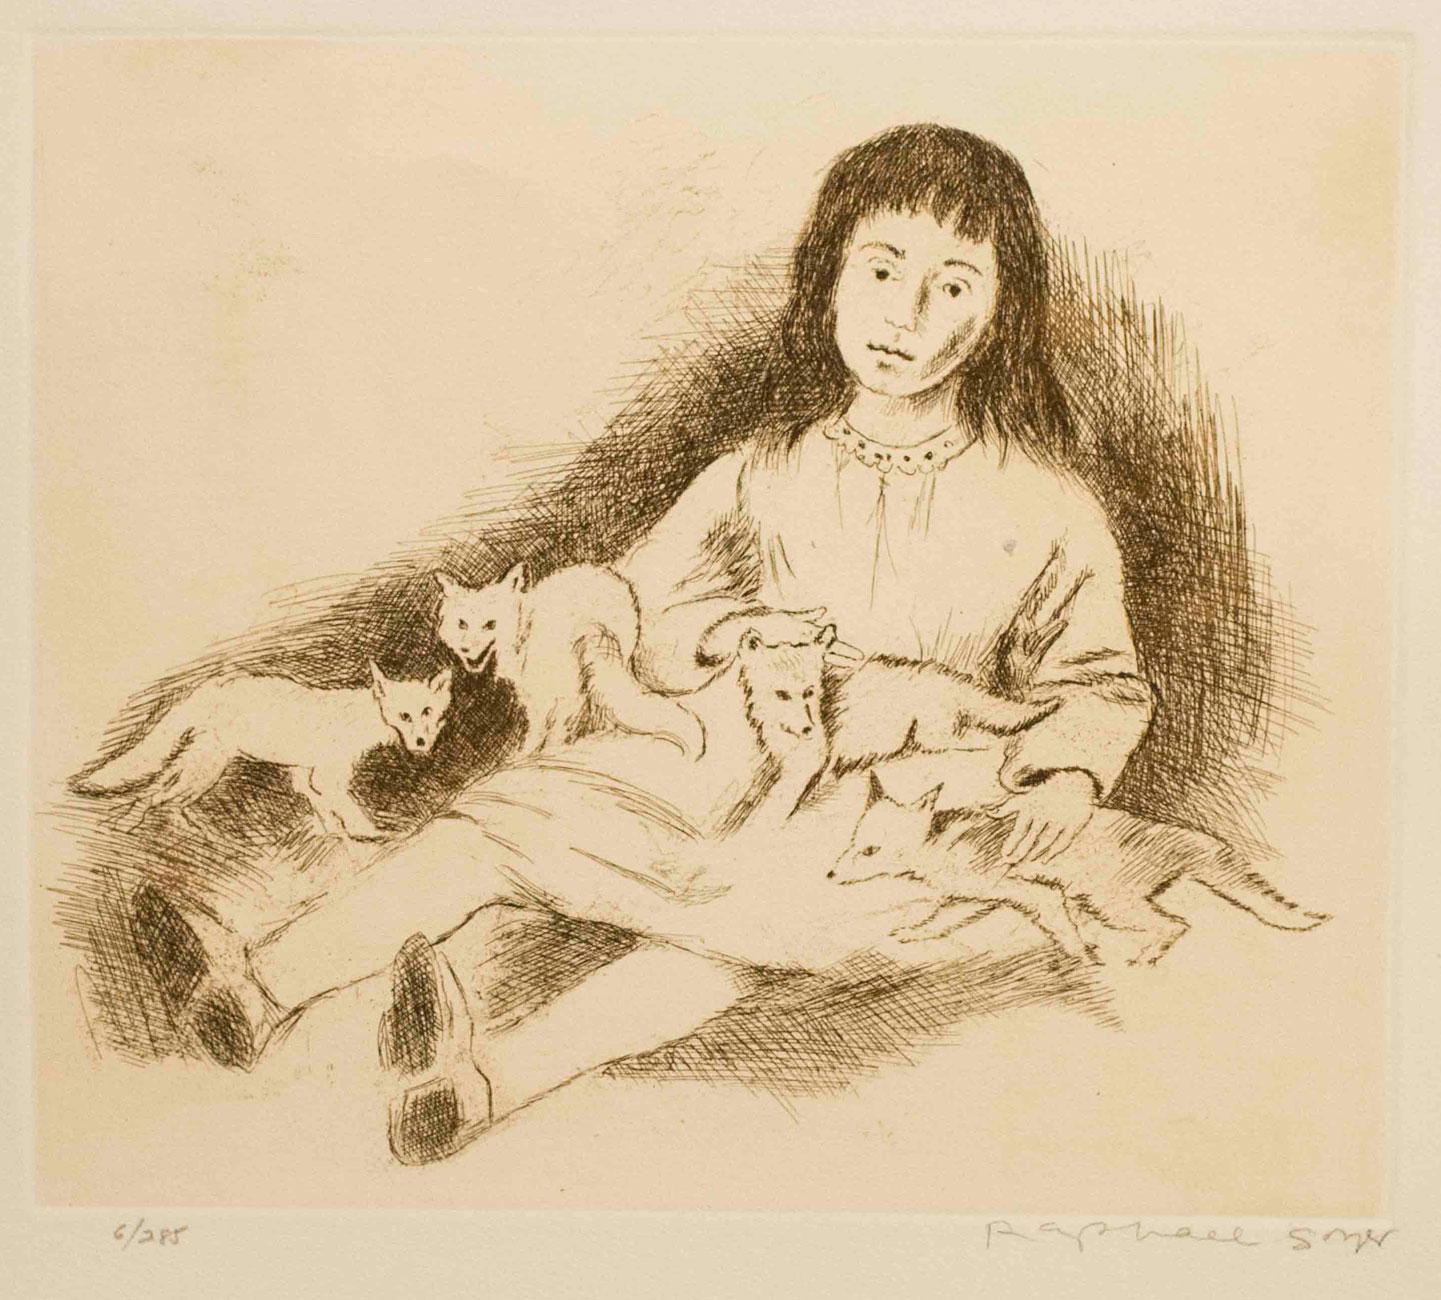 Girl with Foxes - Print by Raphael Soyer